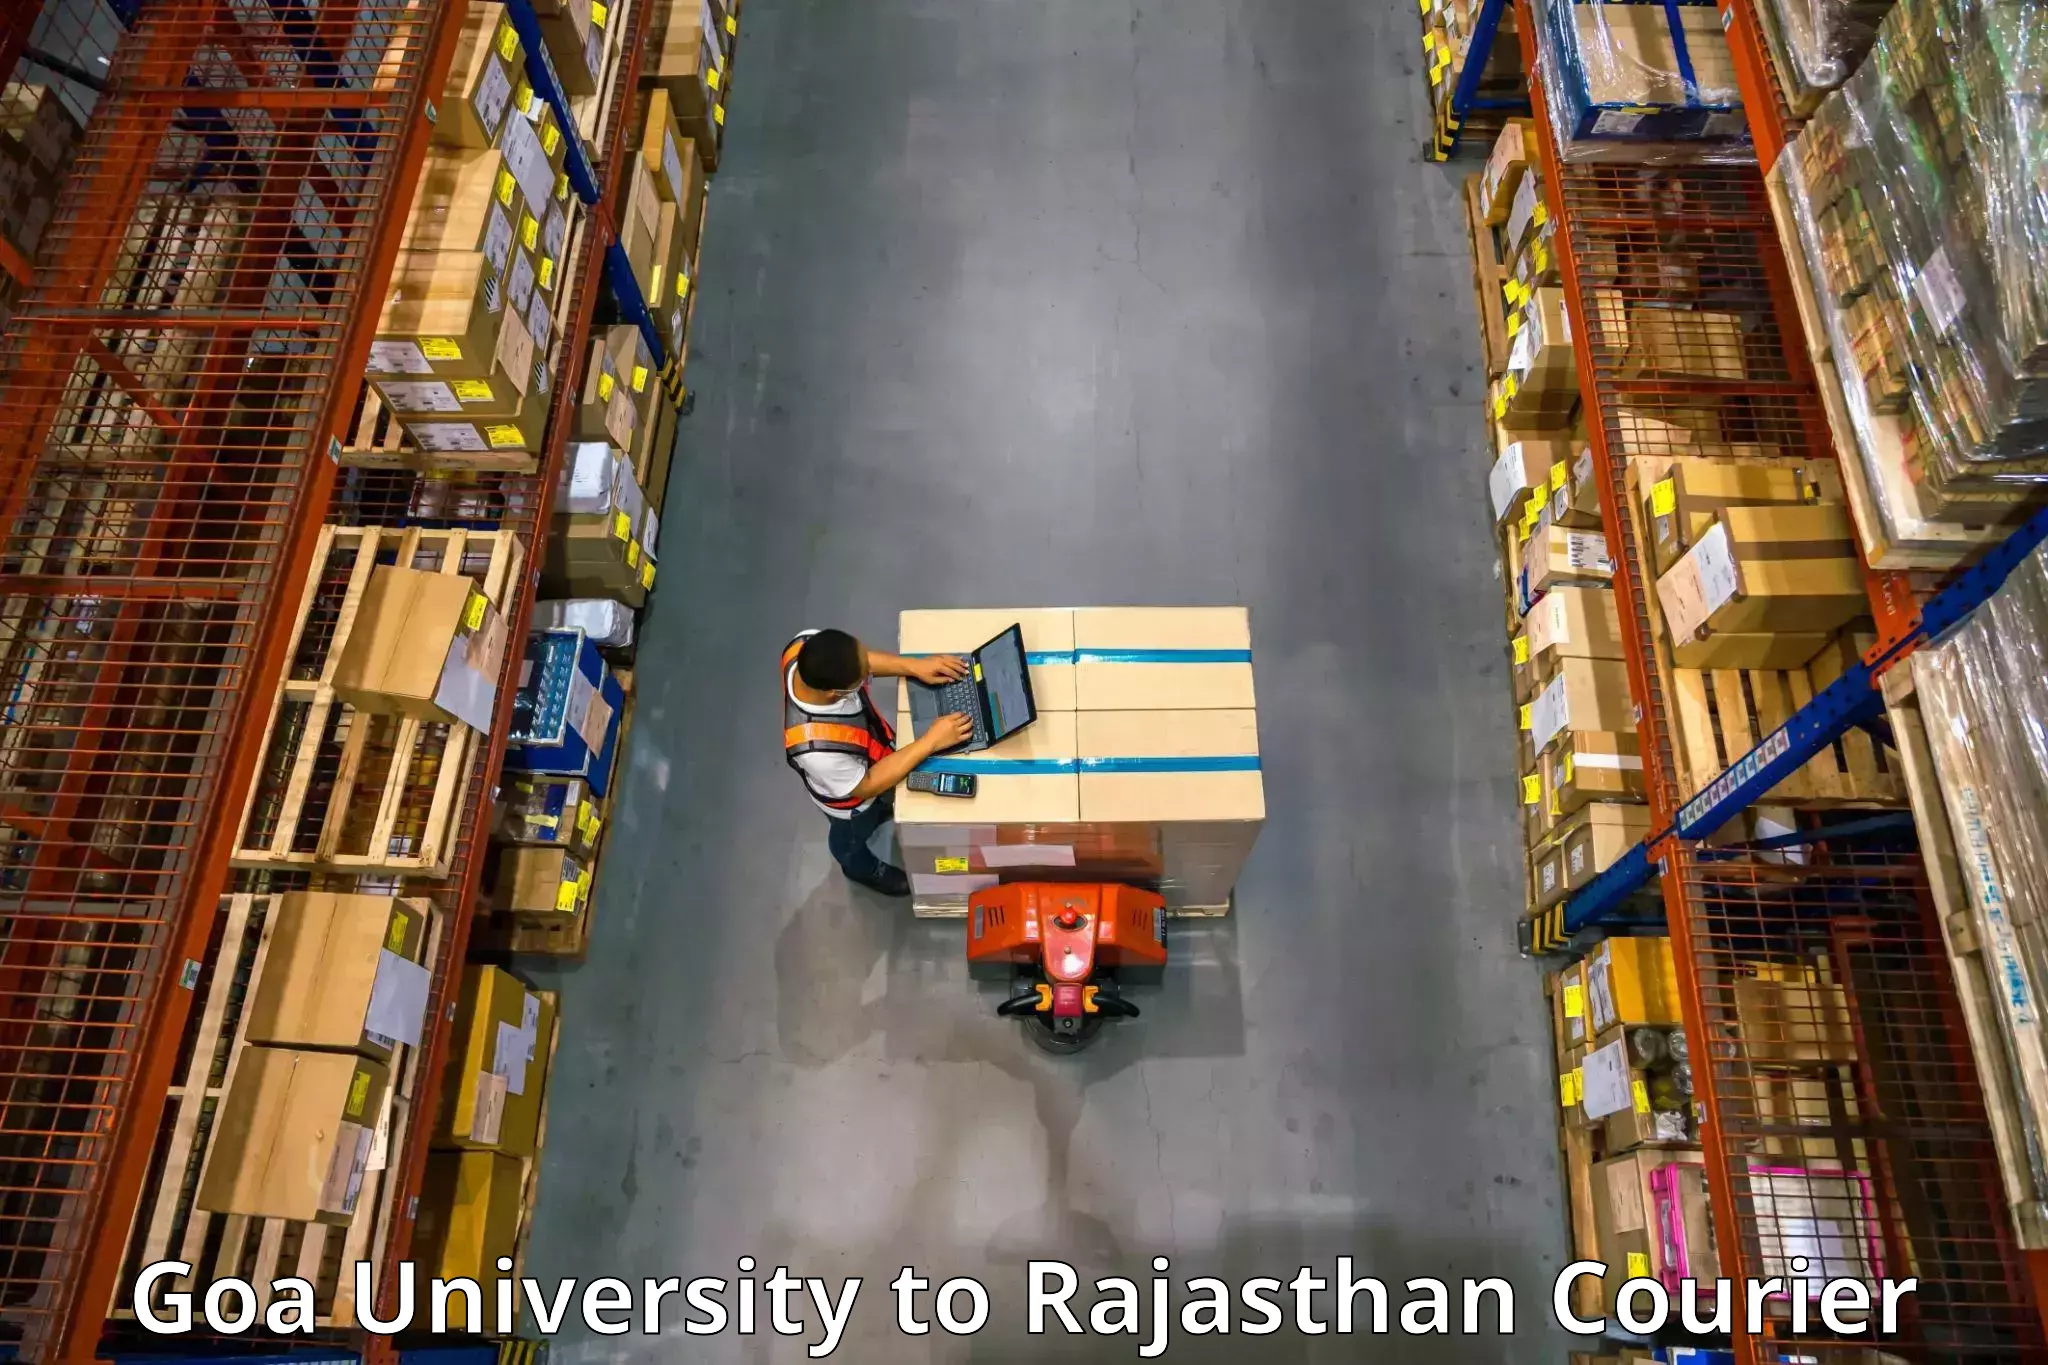 Furniture shipping services Goa University to Rajasthan